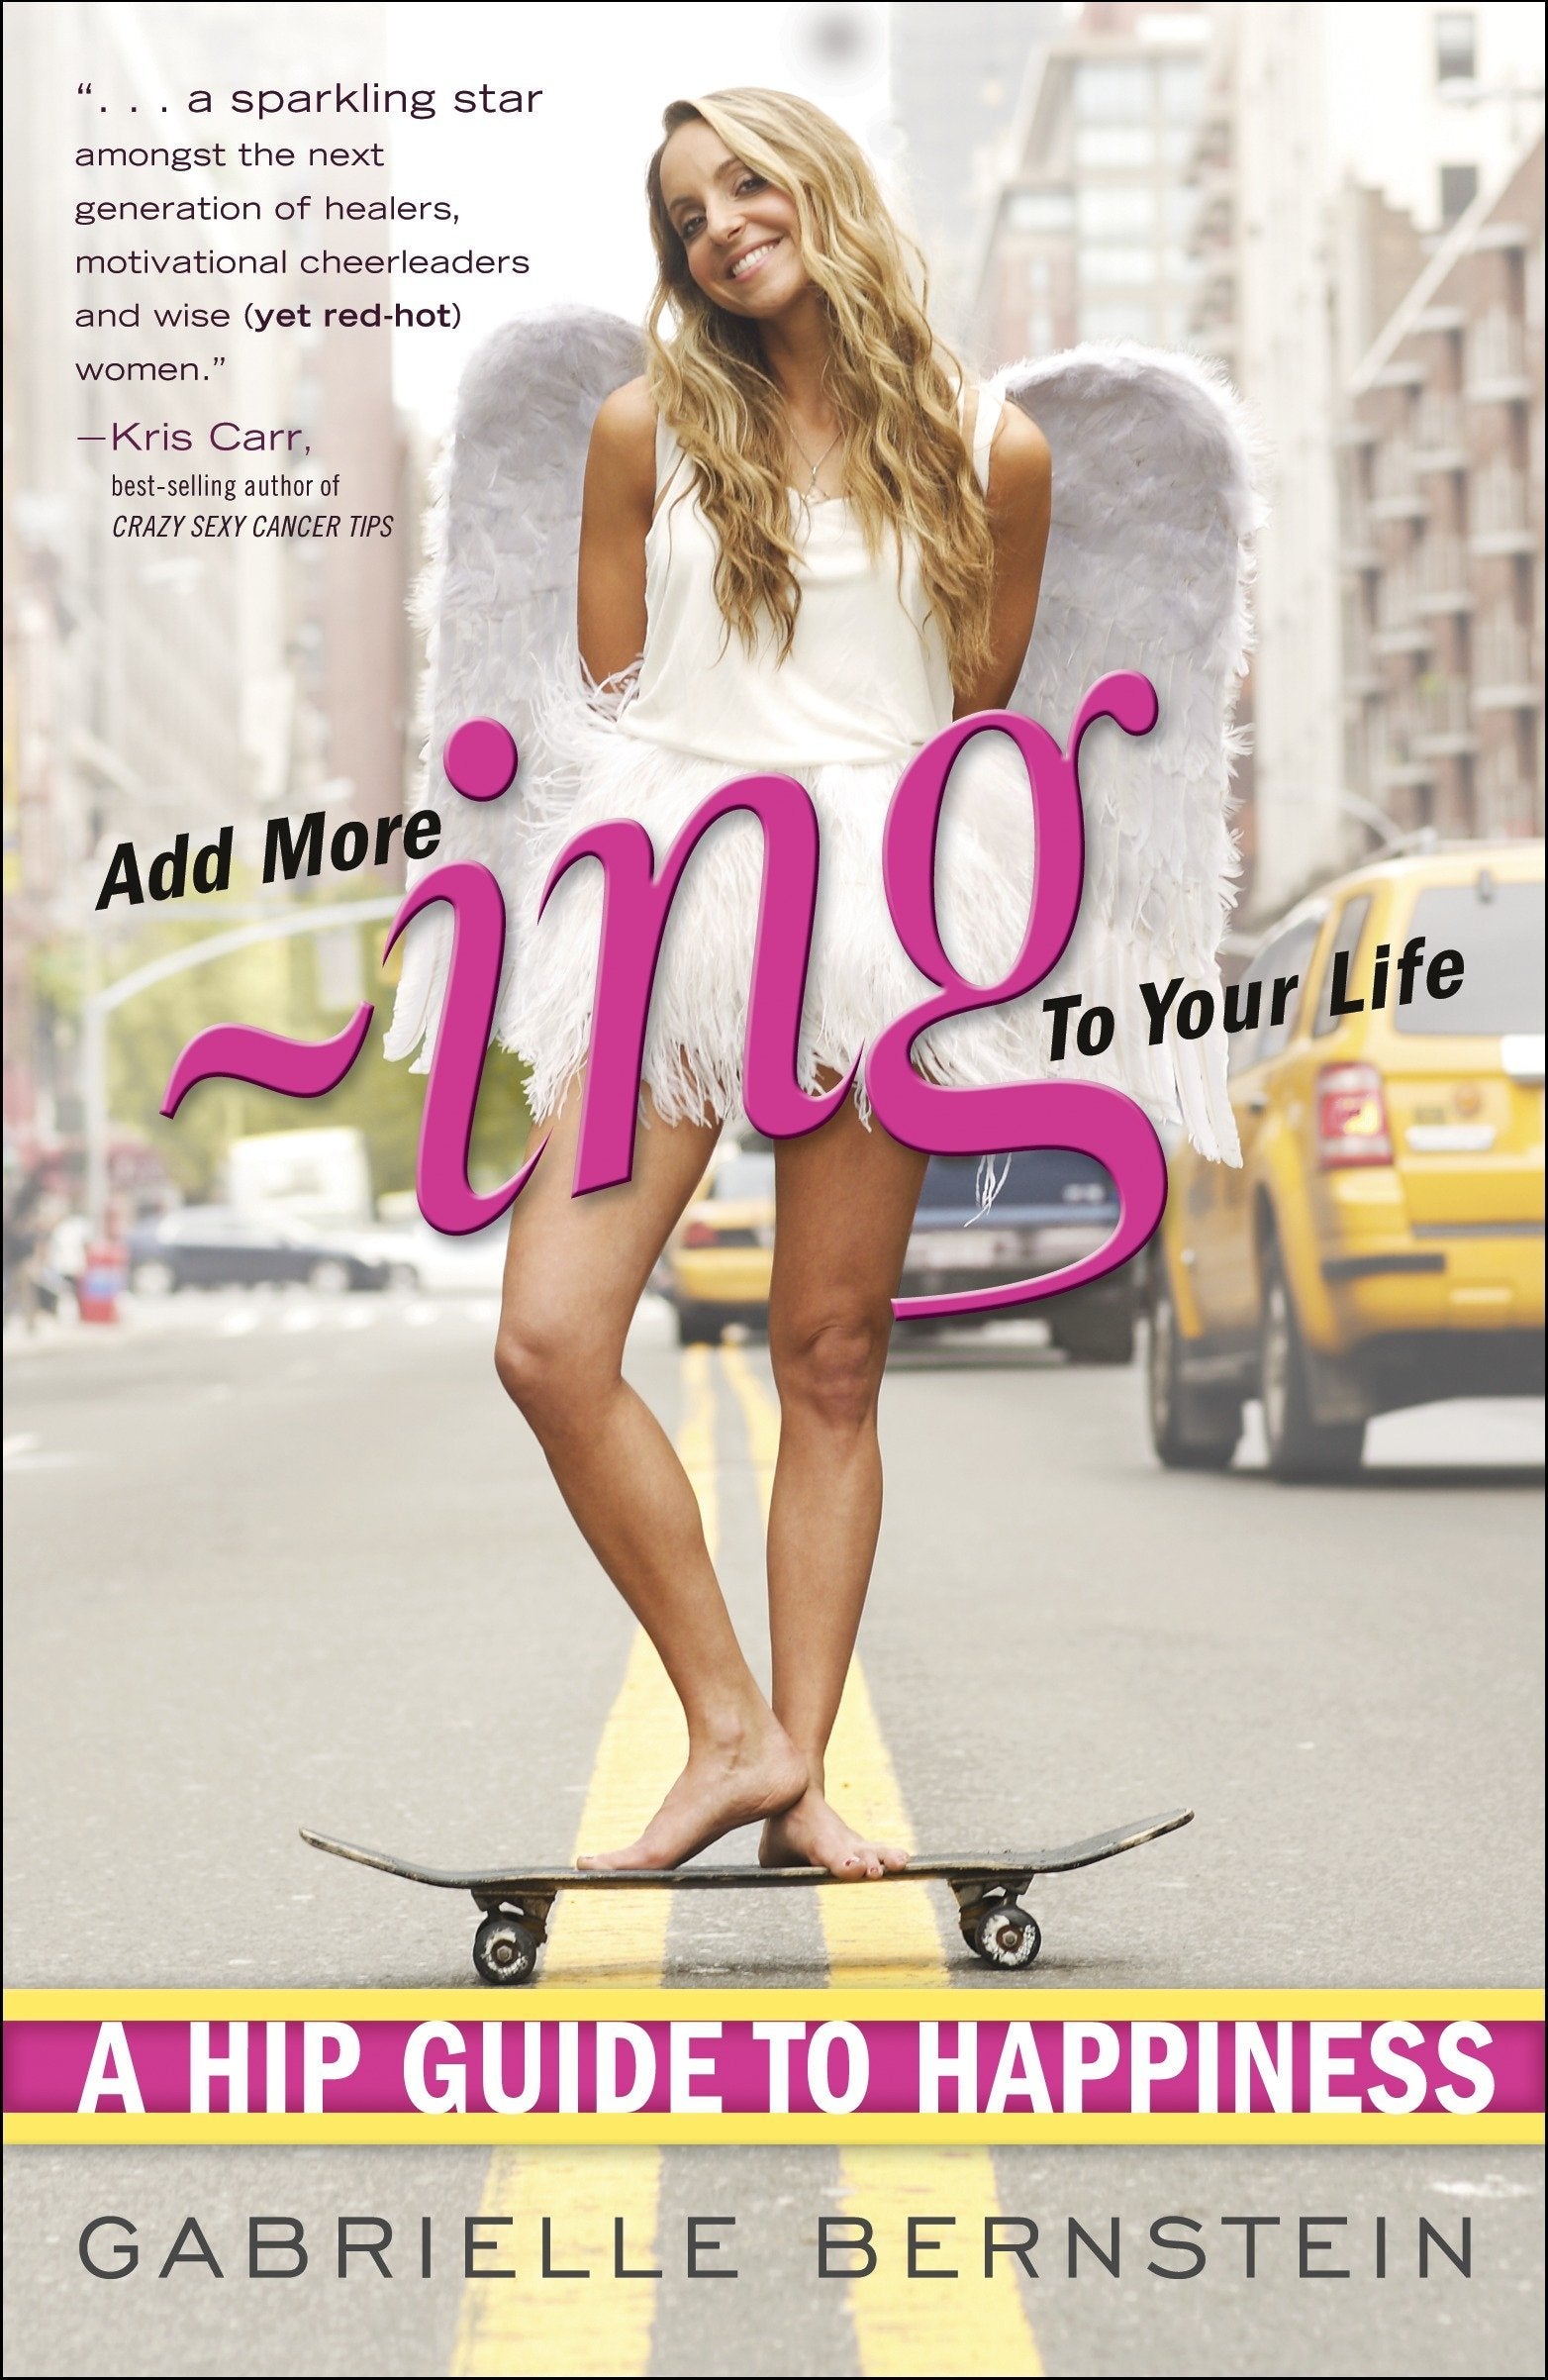 Add More Ing to Your Life: A Hip Guide to Happiness || Gabrielle Bernstein (Paperback)